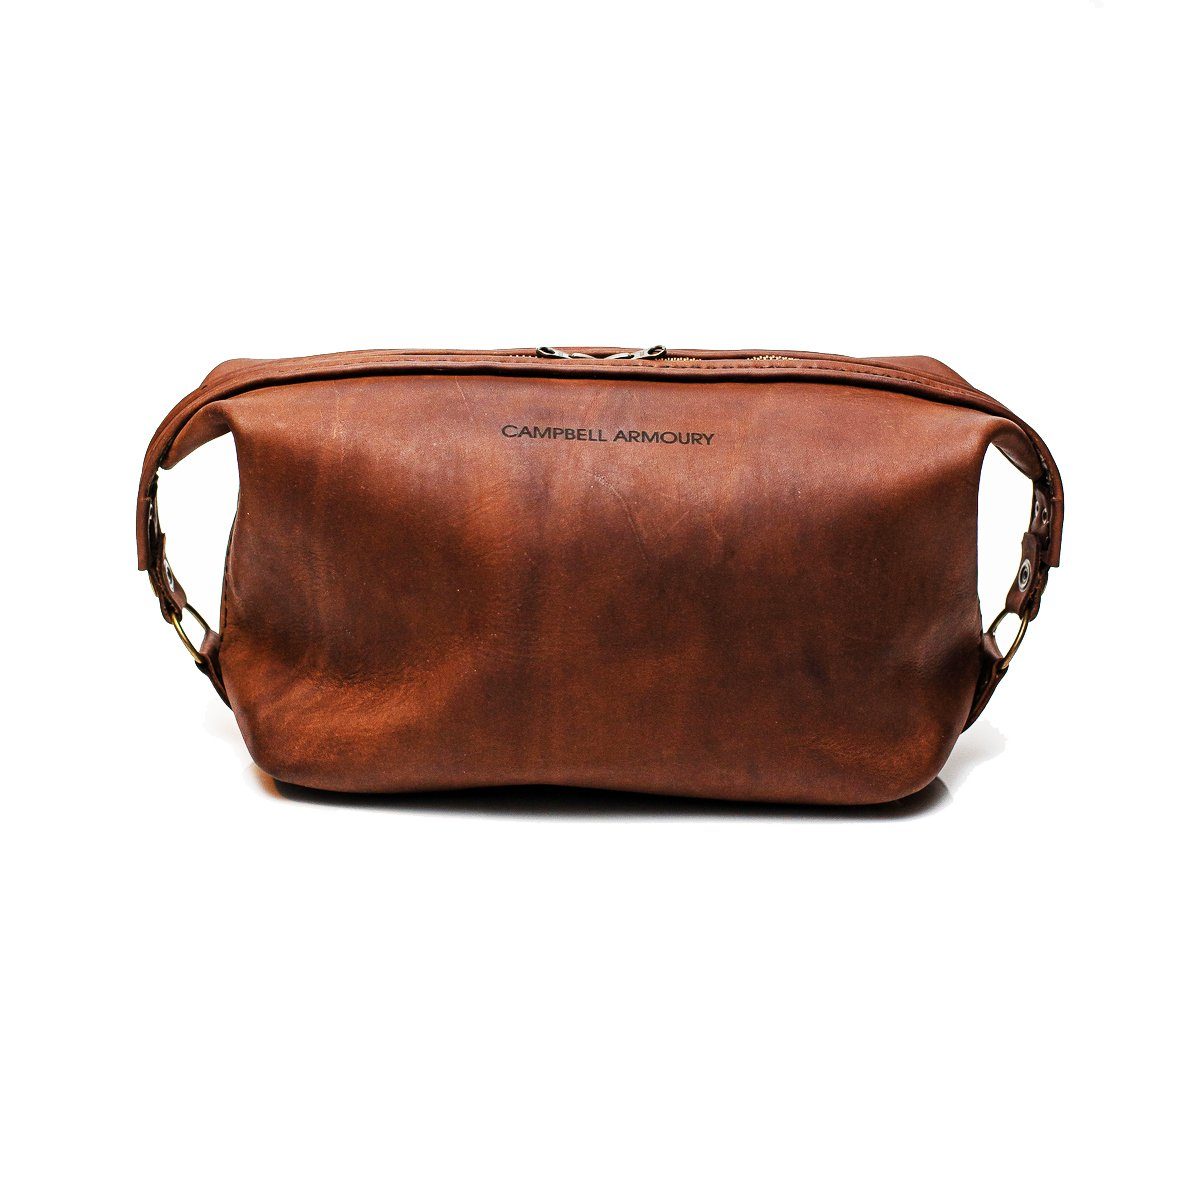 Campbell Armoury Leather Toiletry Bag clothing & accessories Campbell Armoury brown